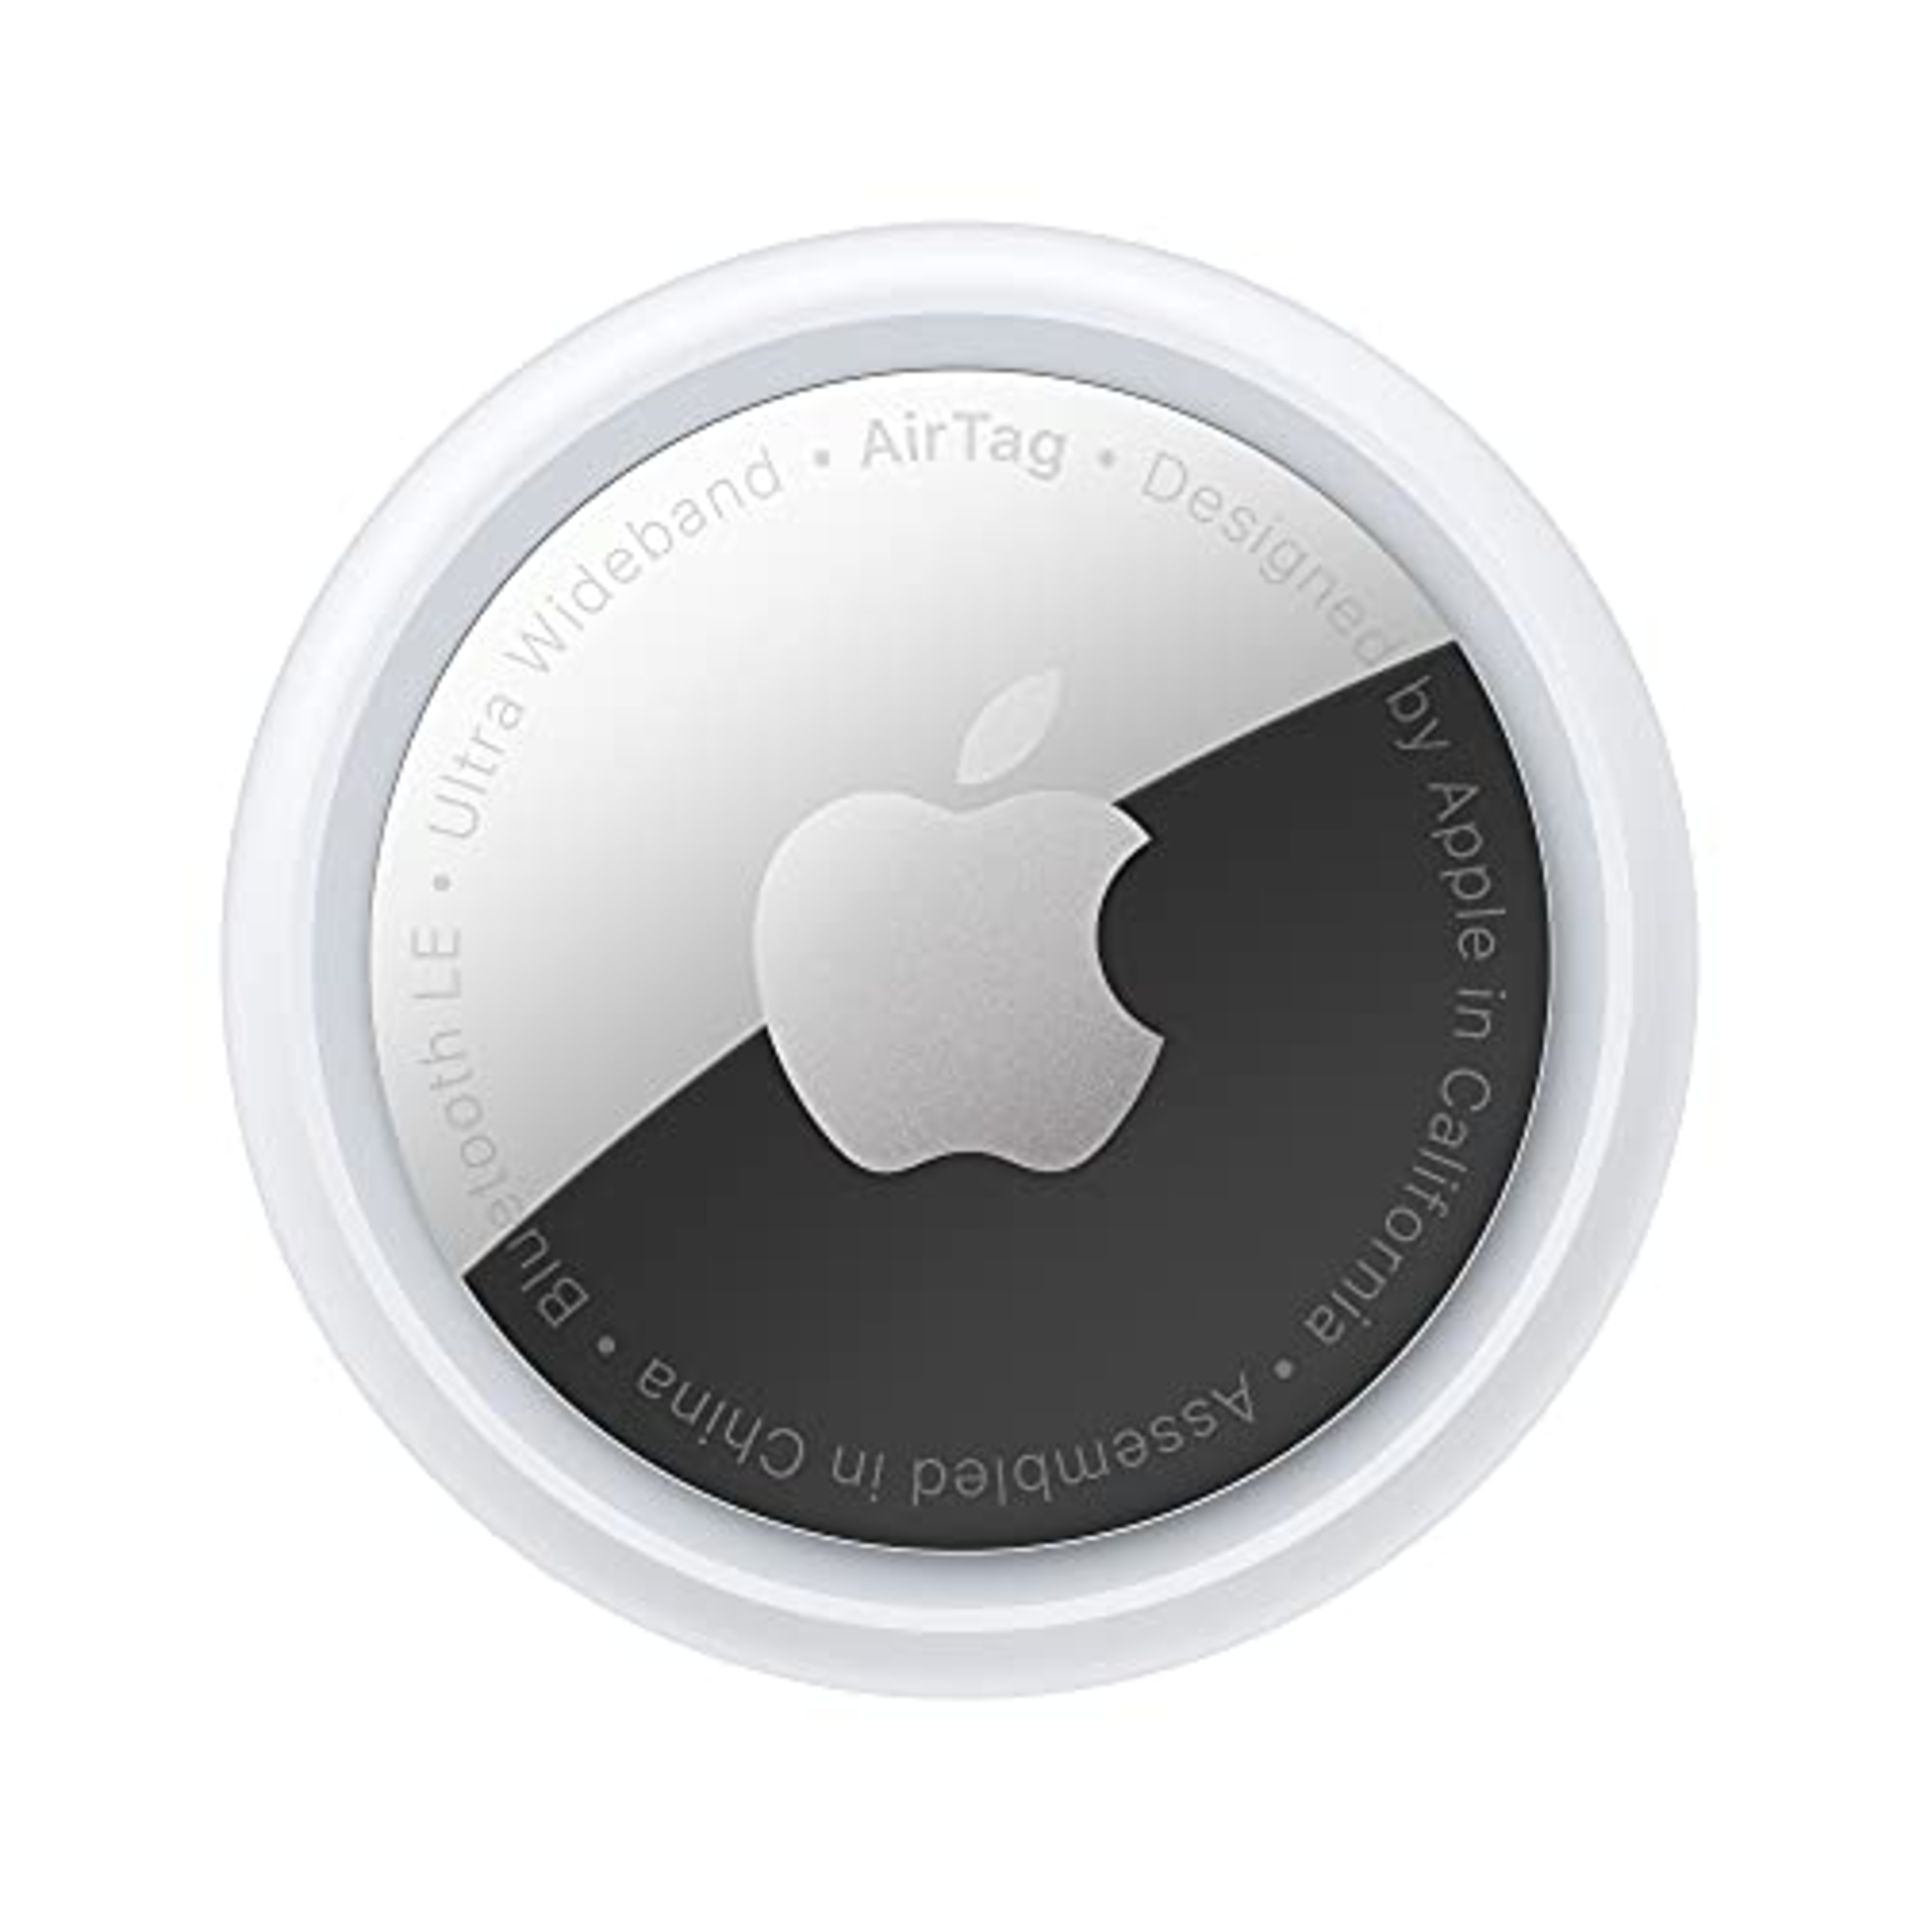 Apple AirTag - Image 7 of 15